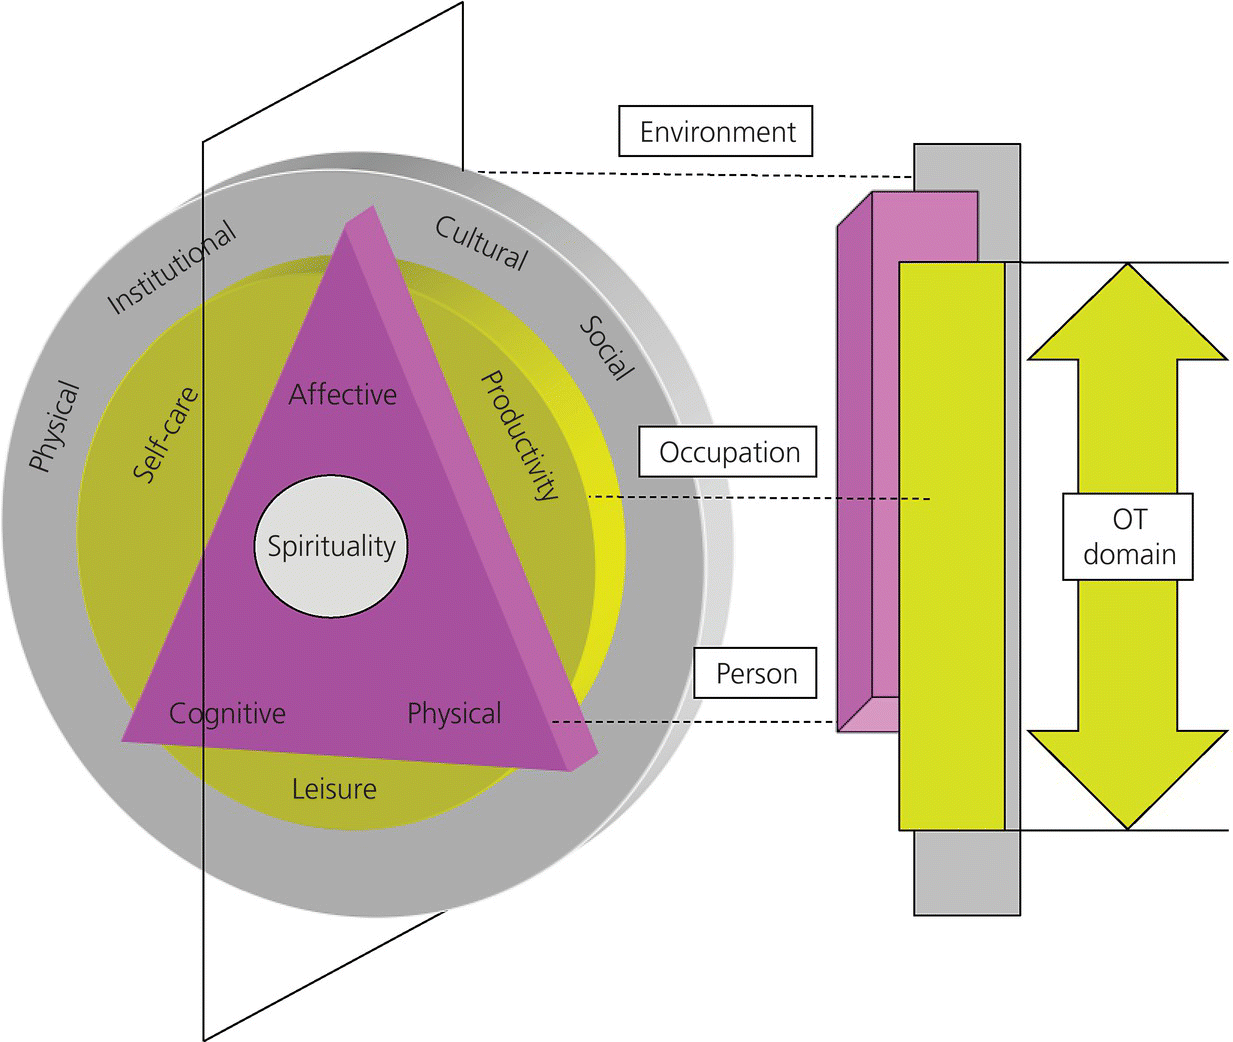 3D diagram of the CMOP‐E depicted as concentric circles for environment and occupation with a triangle for domains of a person and bars with a double-headed arrow on the right side for OT domain.